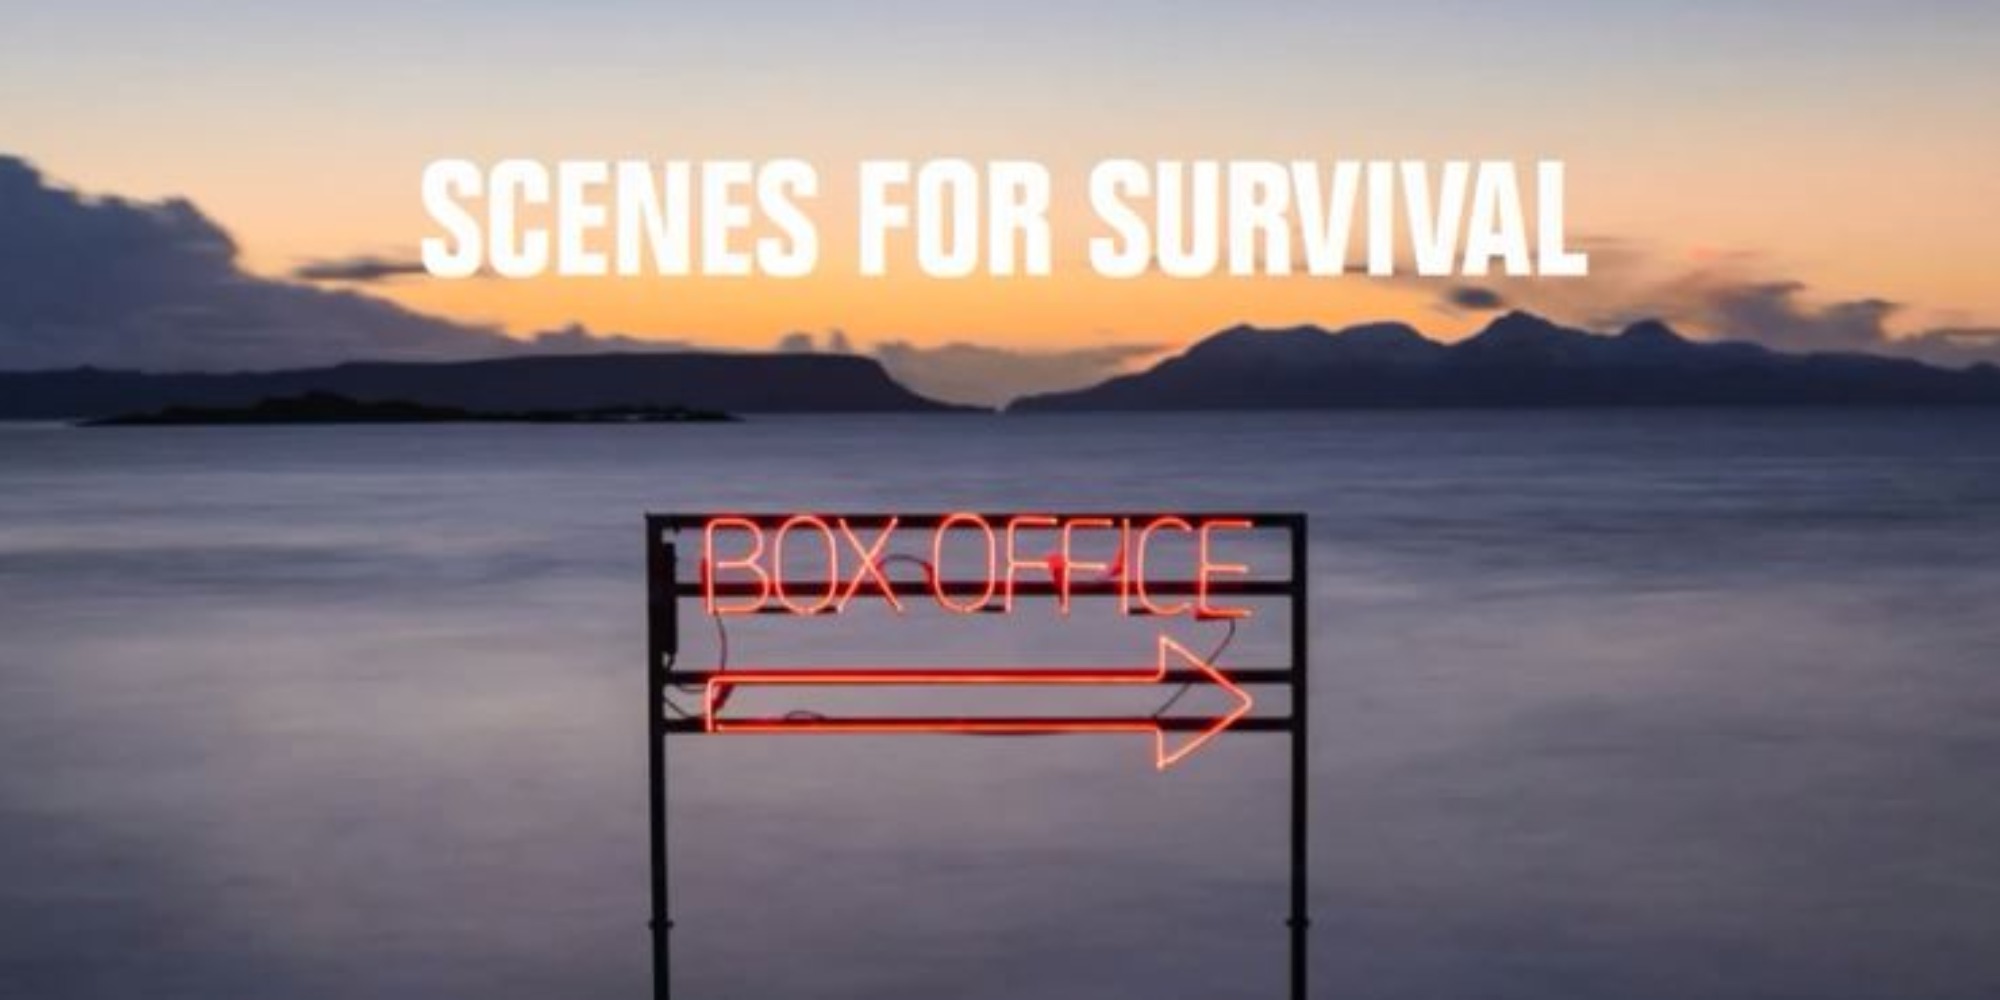 An image of a body of water with mountains in the distance covering the horizon, the text 'Scenes for Survival' is in the sky with a sign below it reading 'Box office' in red with an arrow pointing right